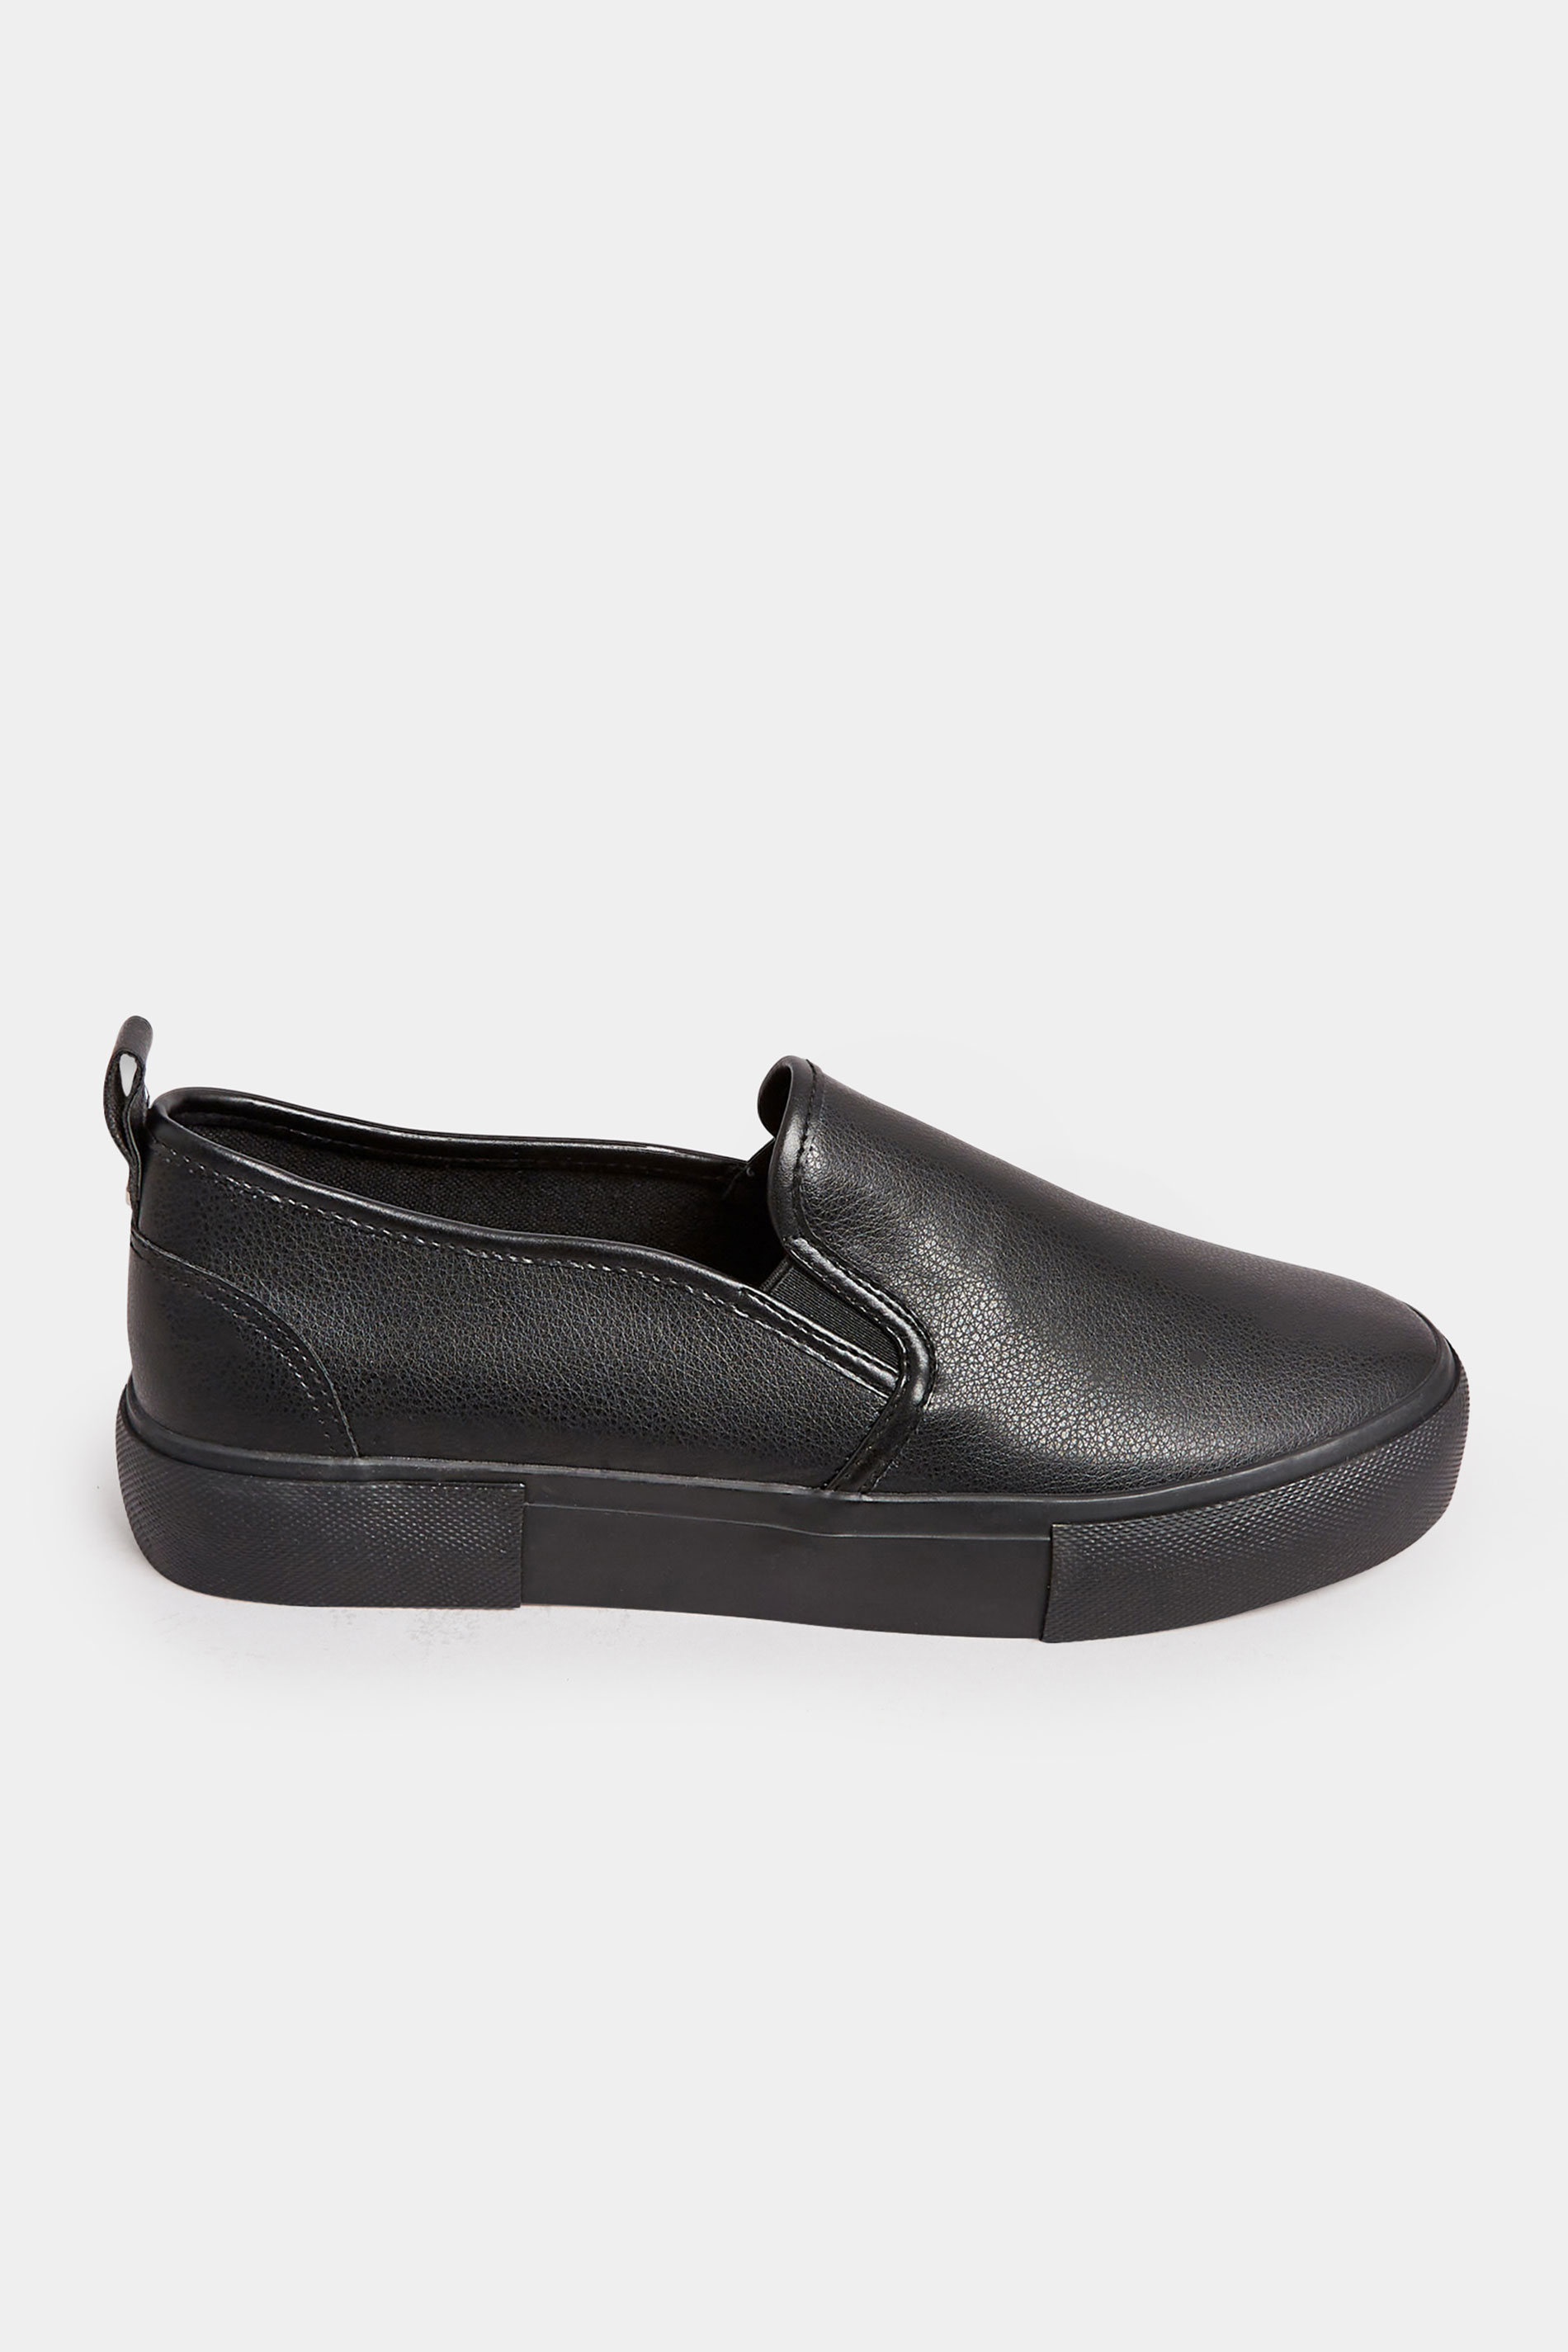 Black PU Slip On Trainers In Wide E Fit | Yours Clothing 3